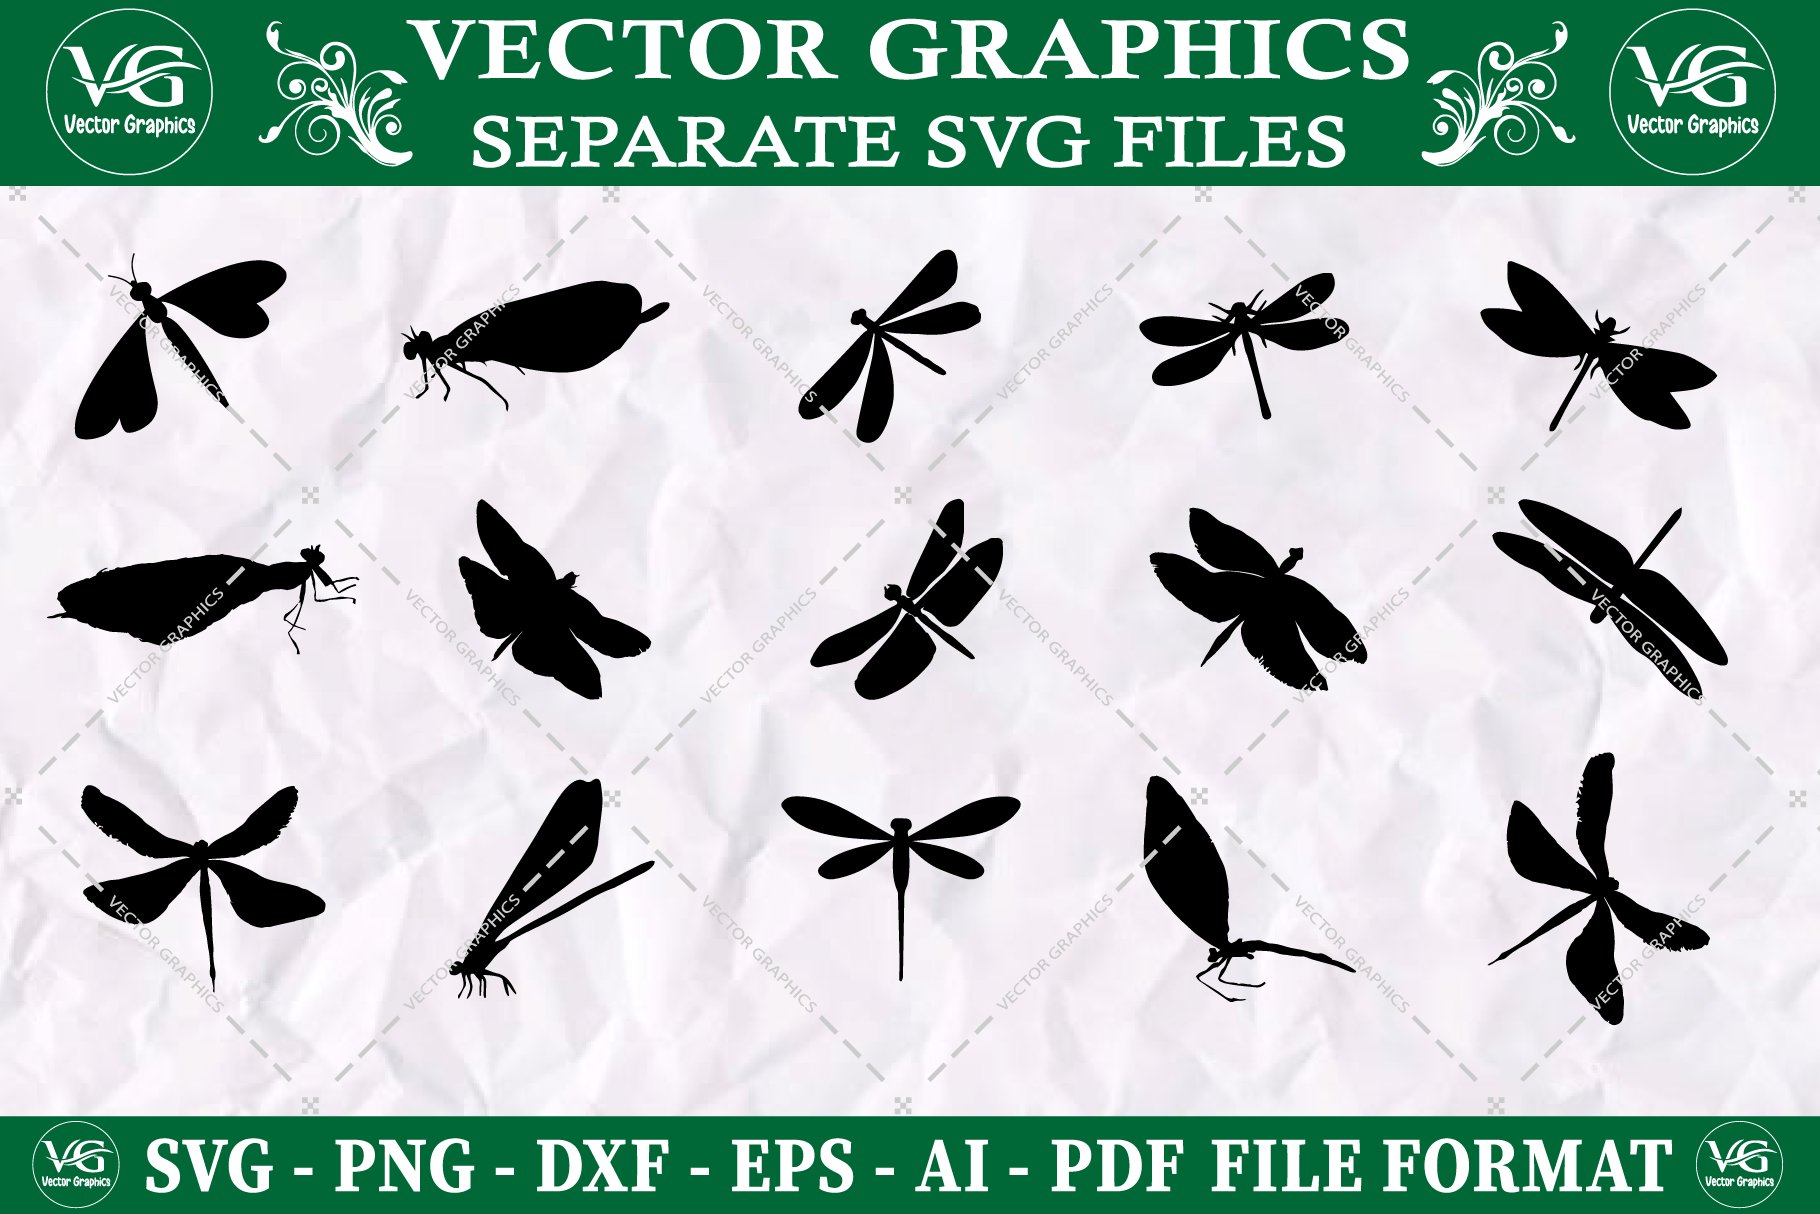 Dragonfly SVG, dragonfly clipart cover image.